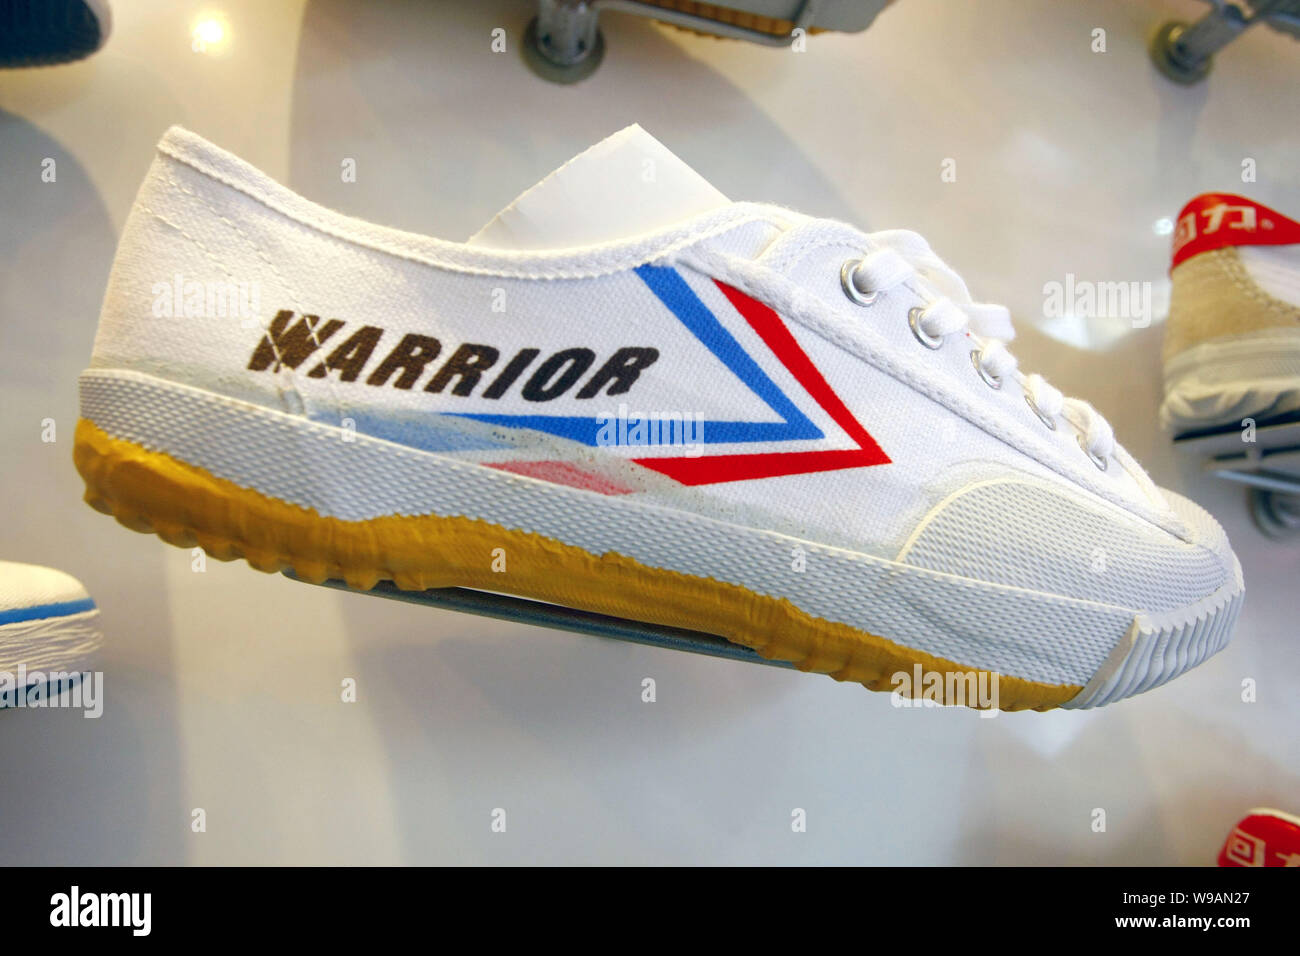 warrior sneakers,Quality assurance,protein-burger.com